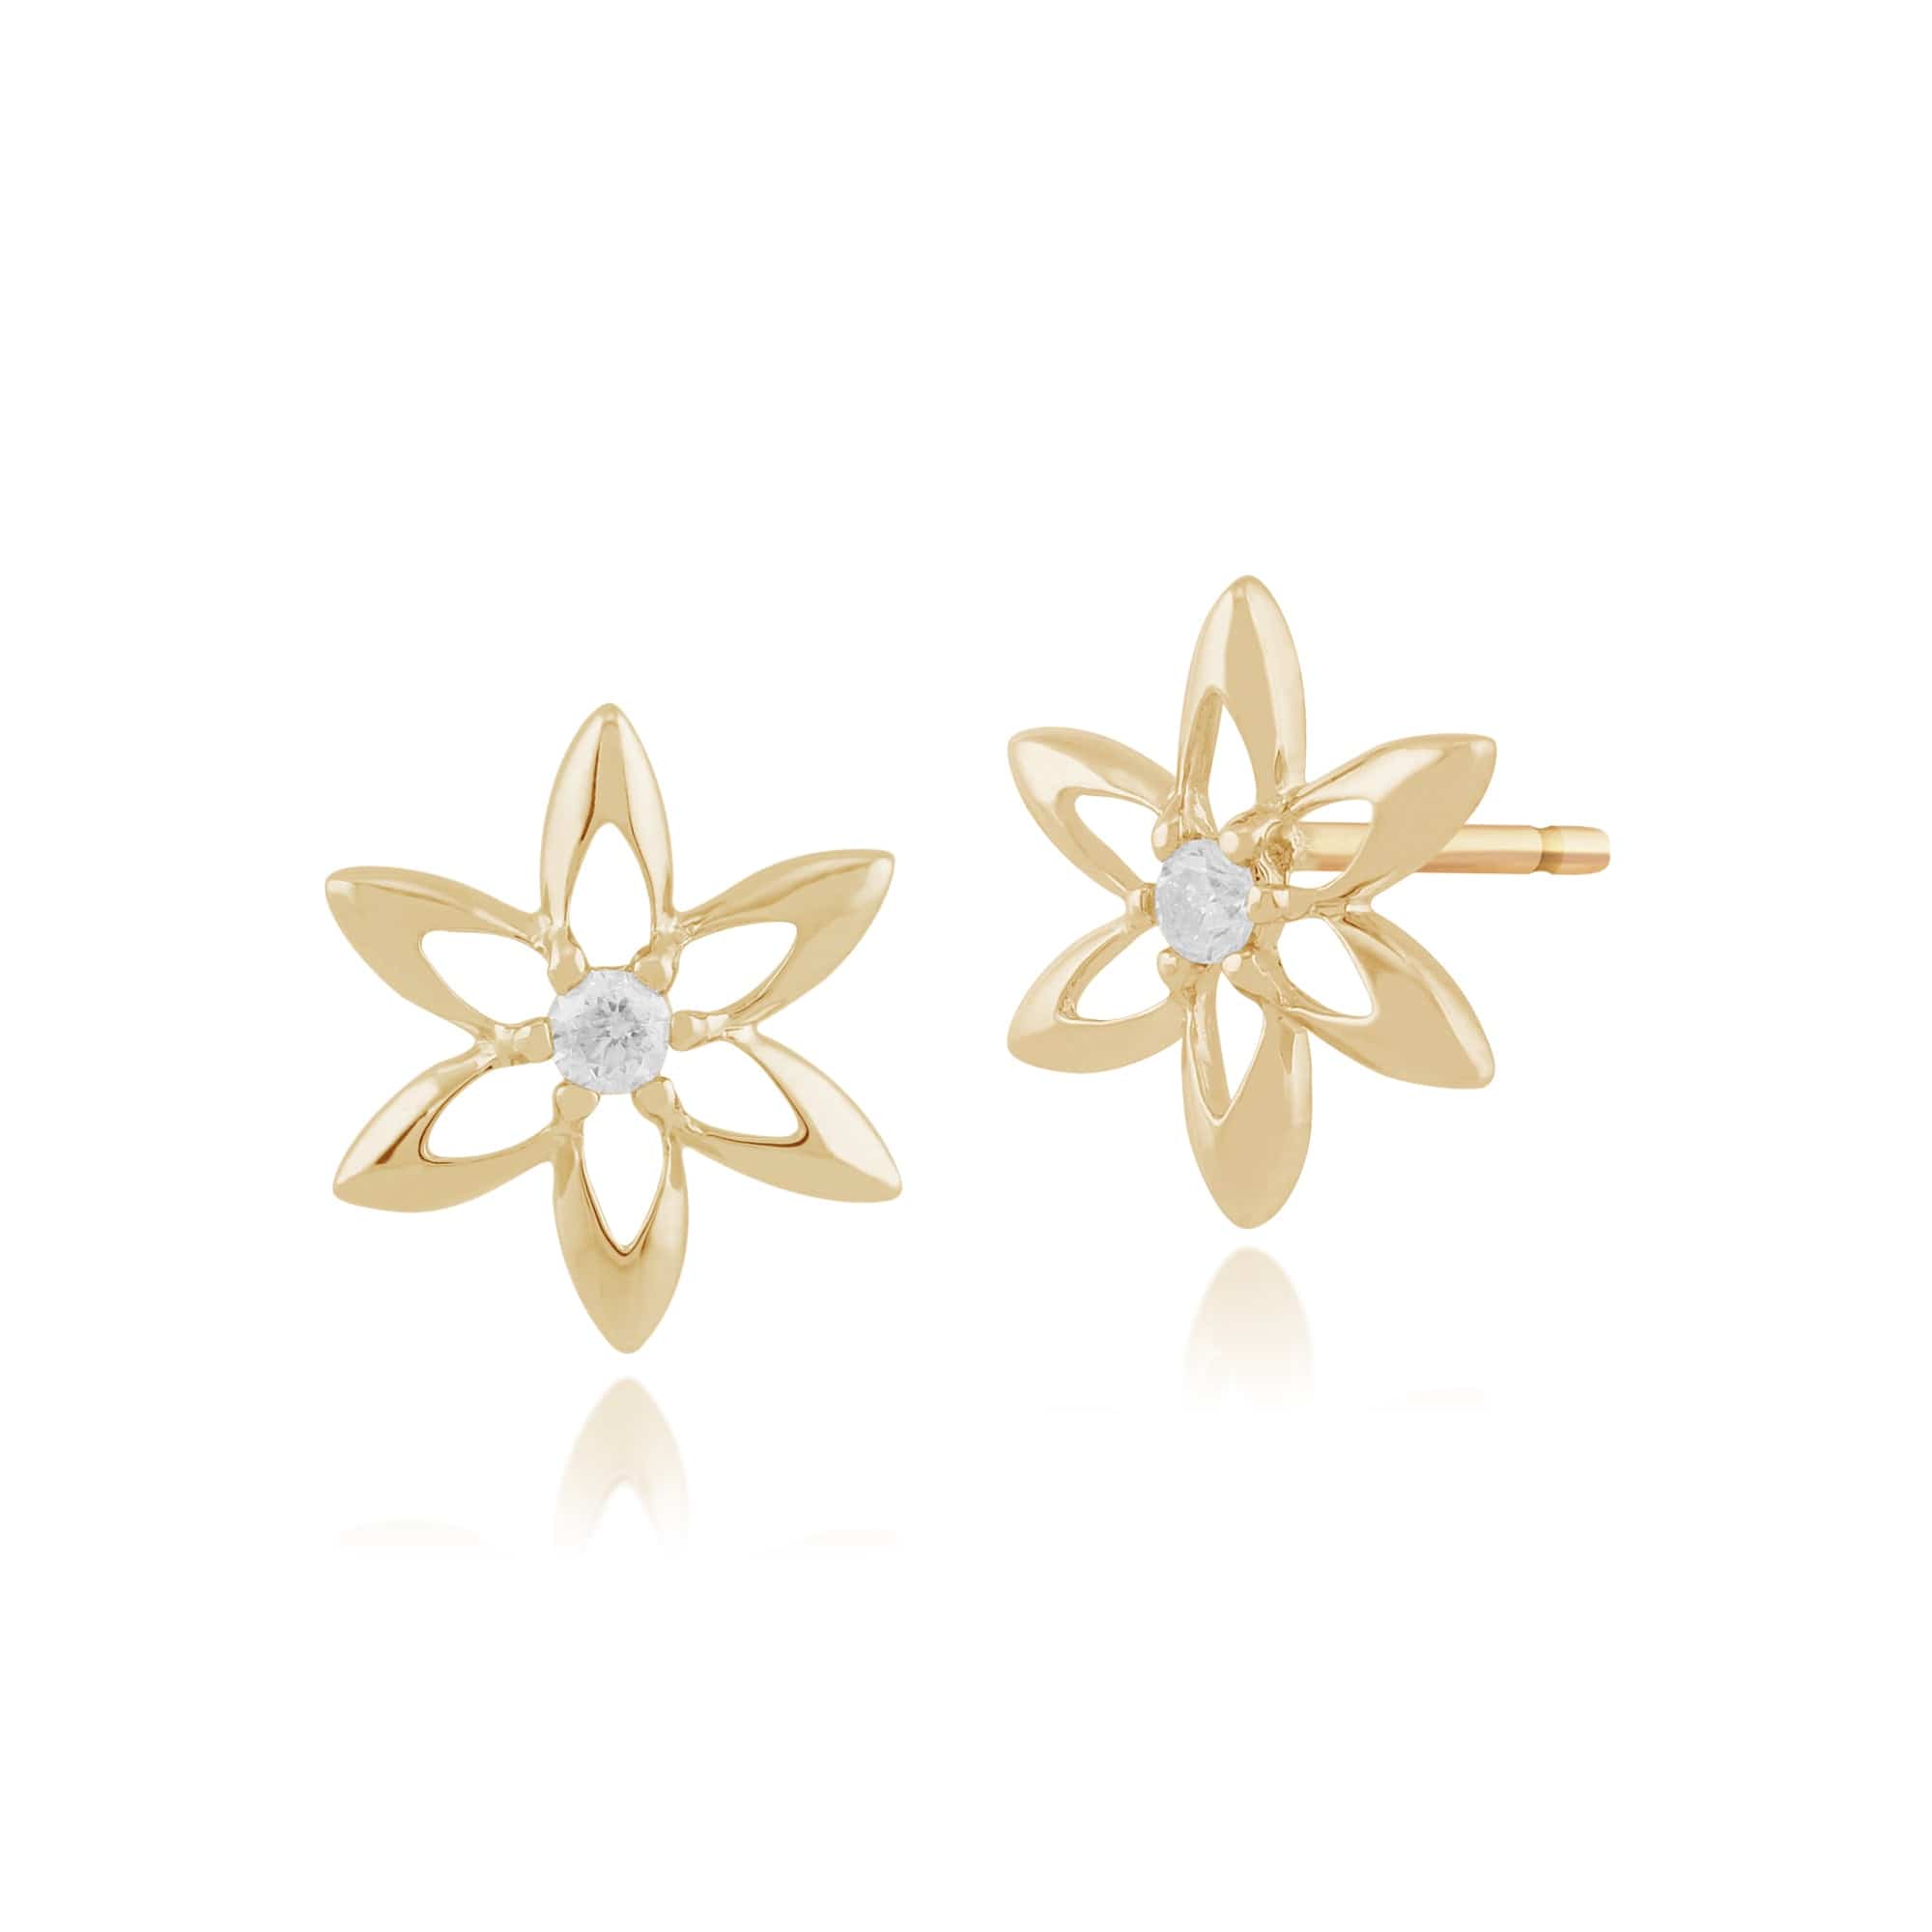 Floral Round Diamond Flower Frame Stud Earrings in 9ct Yellow Gold - Gemondo